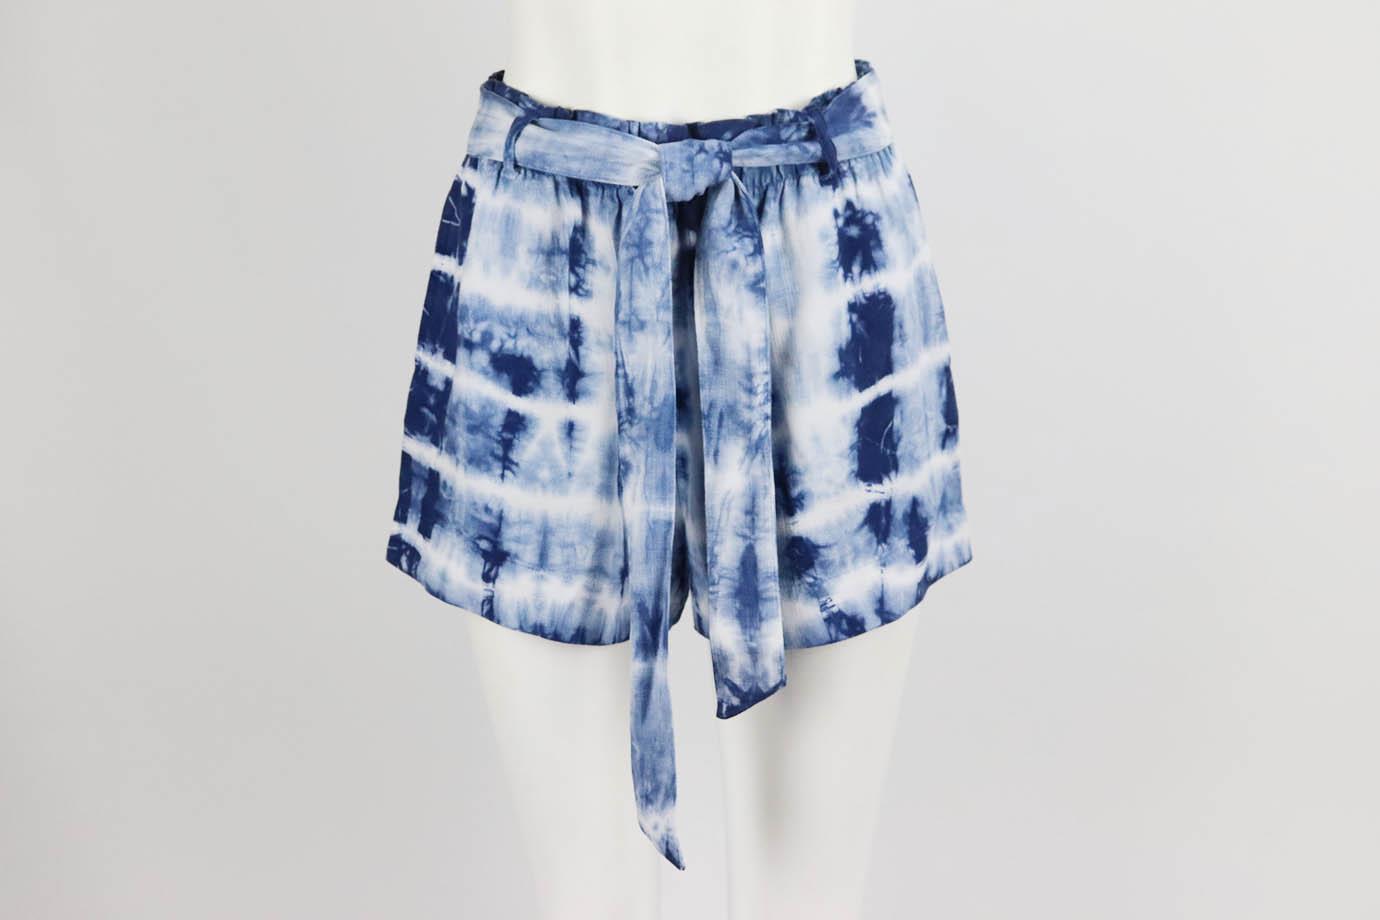 BELLA DAHL BELTED TIE DYED CHAMBRAY SHORTS SMALL